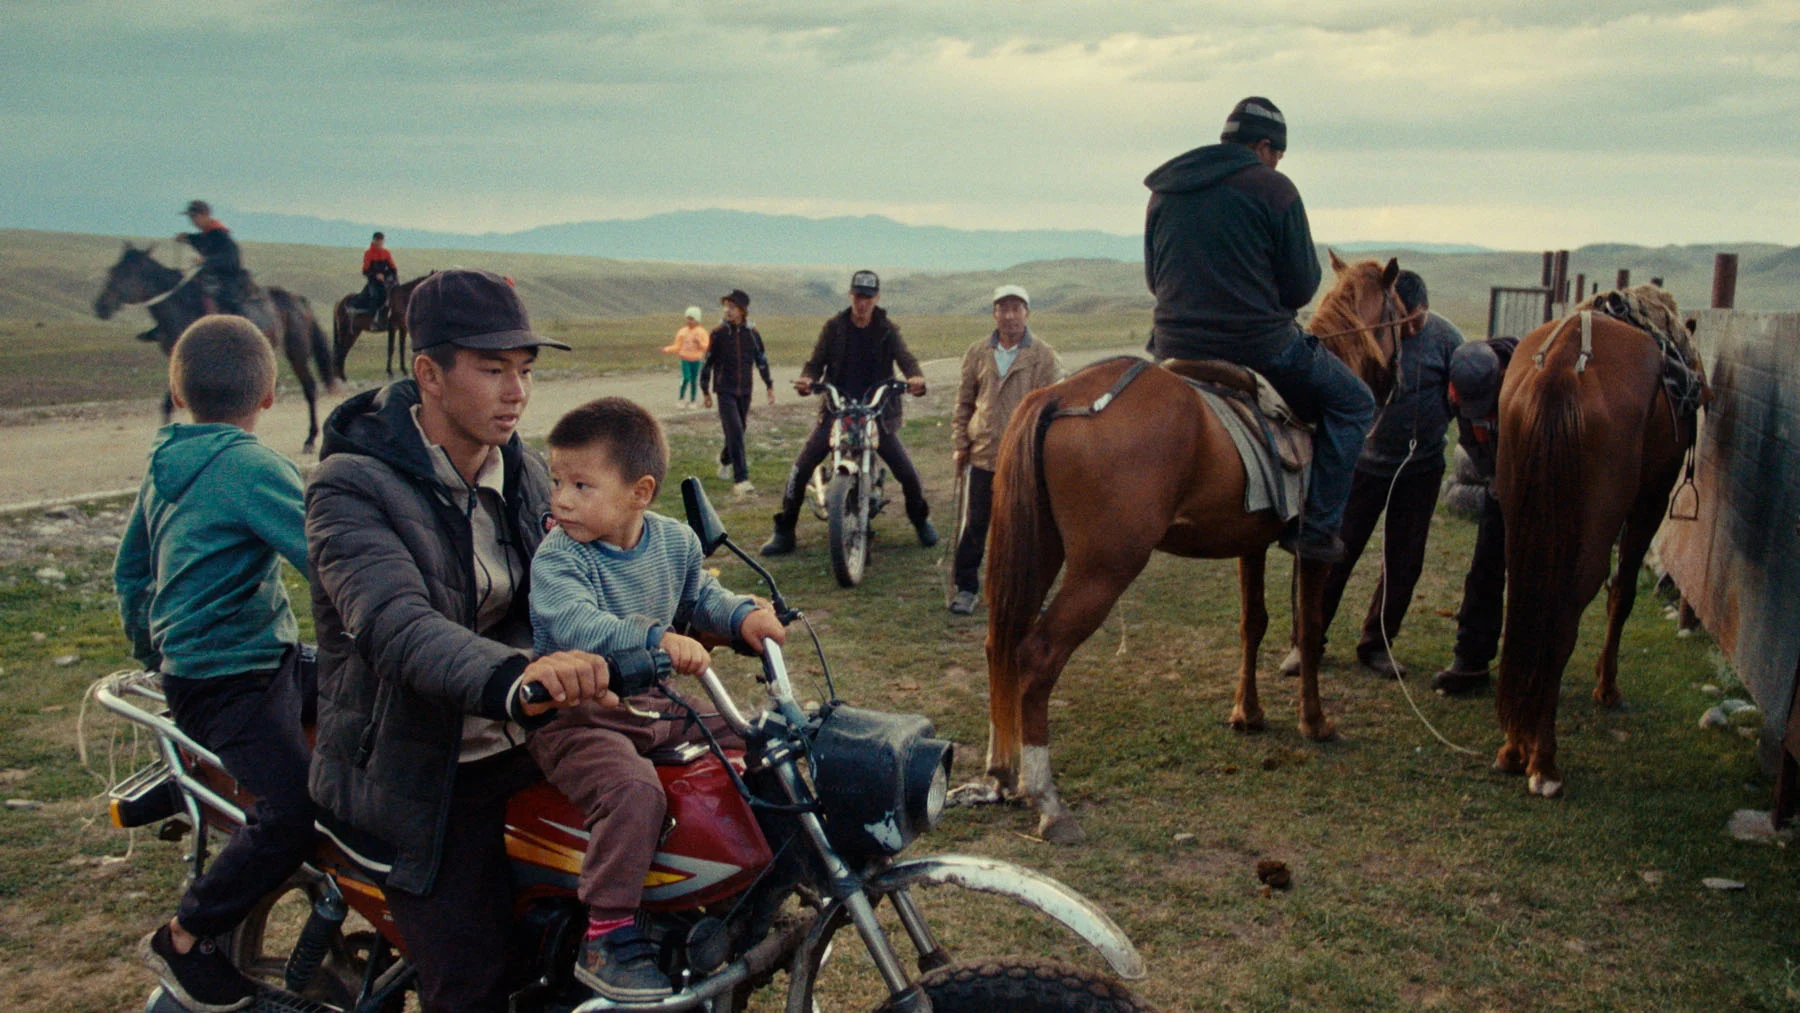 A still from the film “Astride” showing people on horses and motorcycles gathering next to a long road in the steppe of Kazakhstan. 